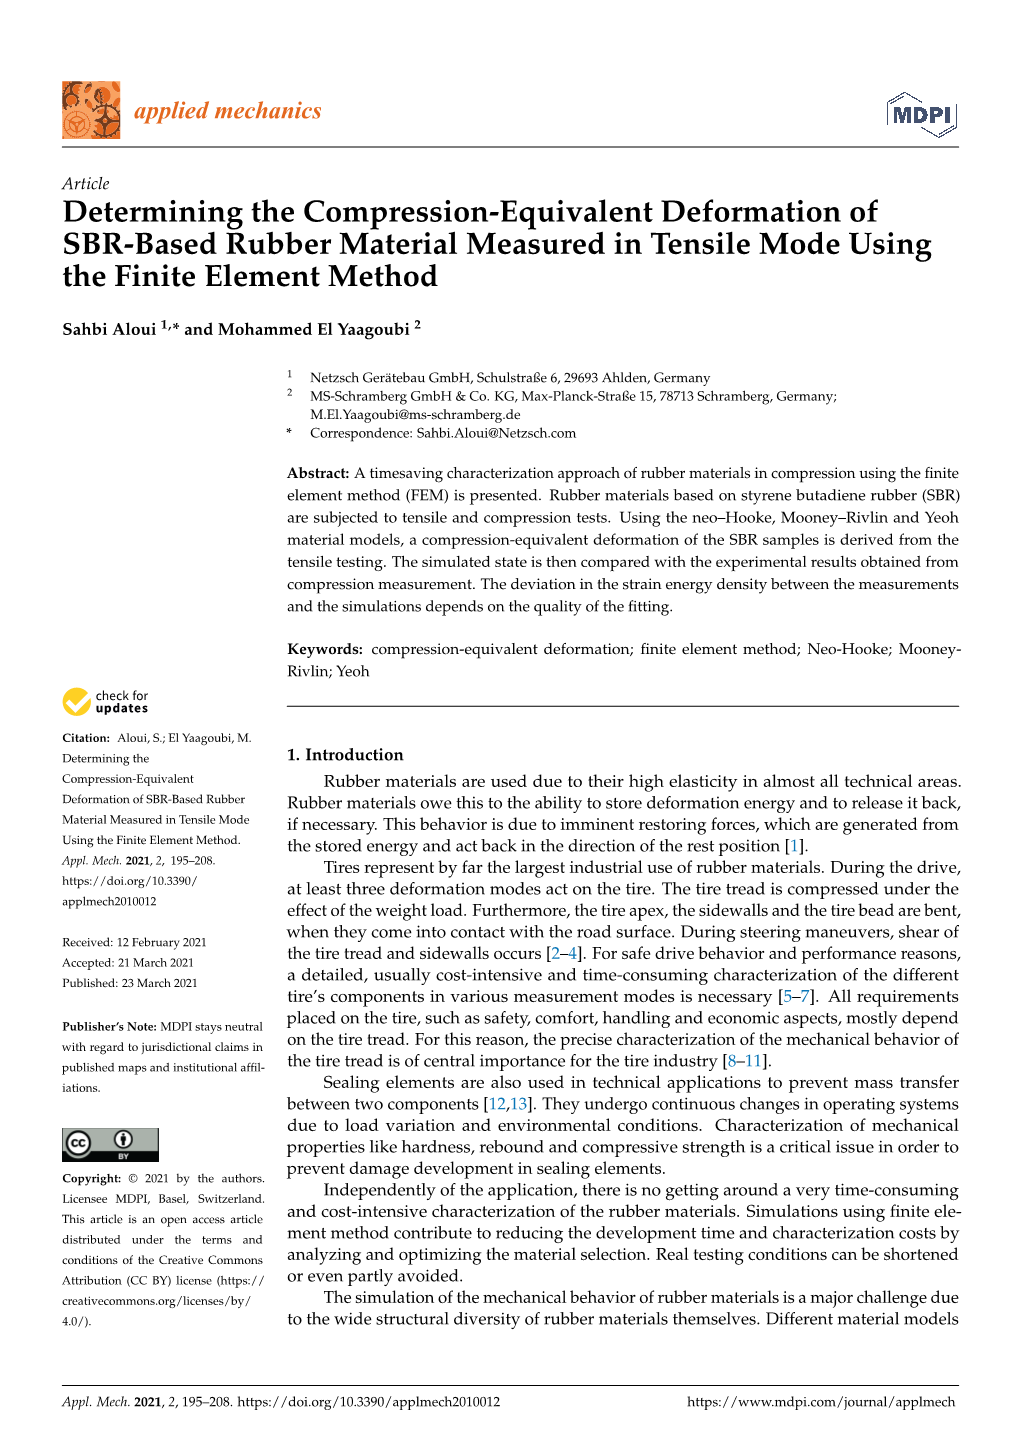 Determining the Compression-Equivalent Deformation of SBR-Based Rubber Material Measured in Tensile Mode Using the Finite Element Method